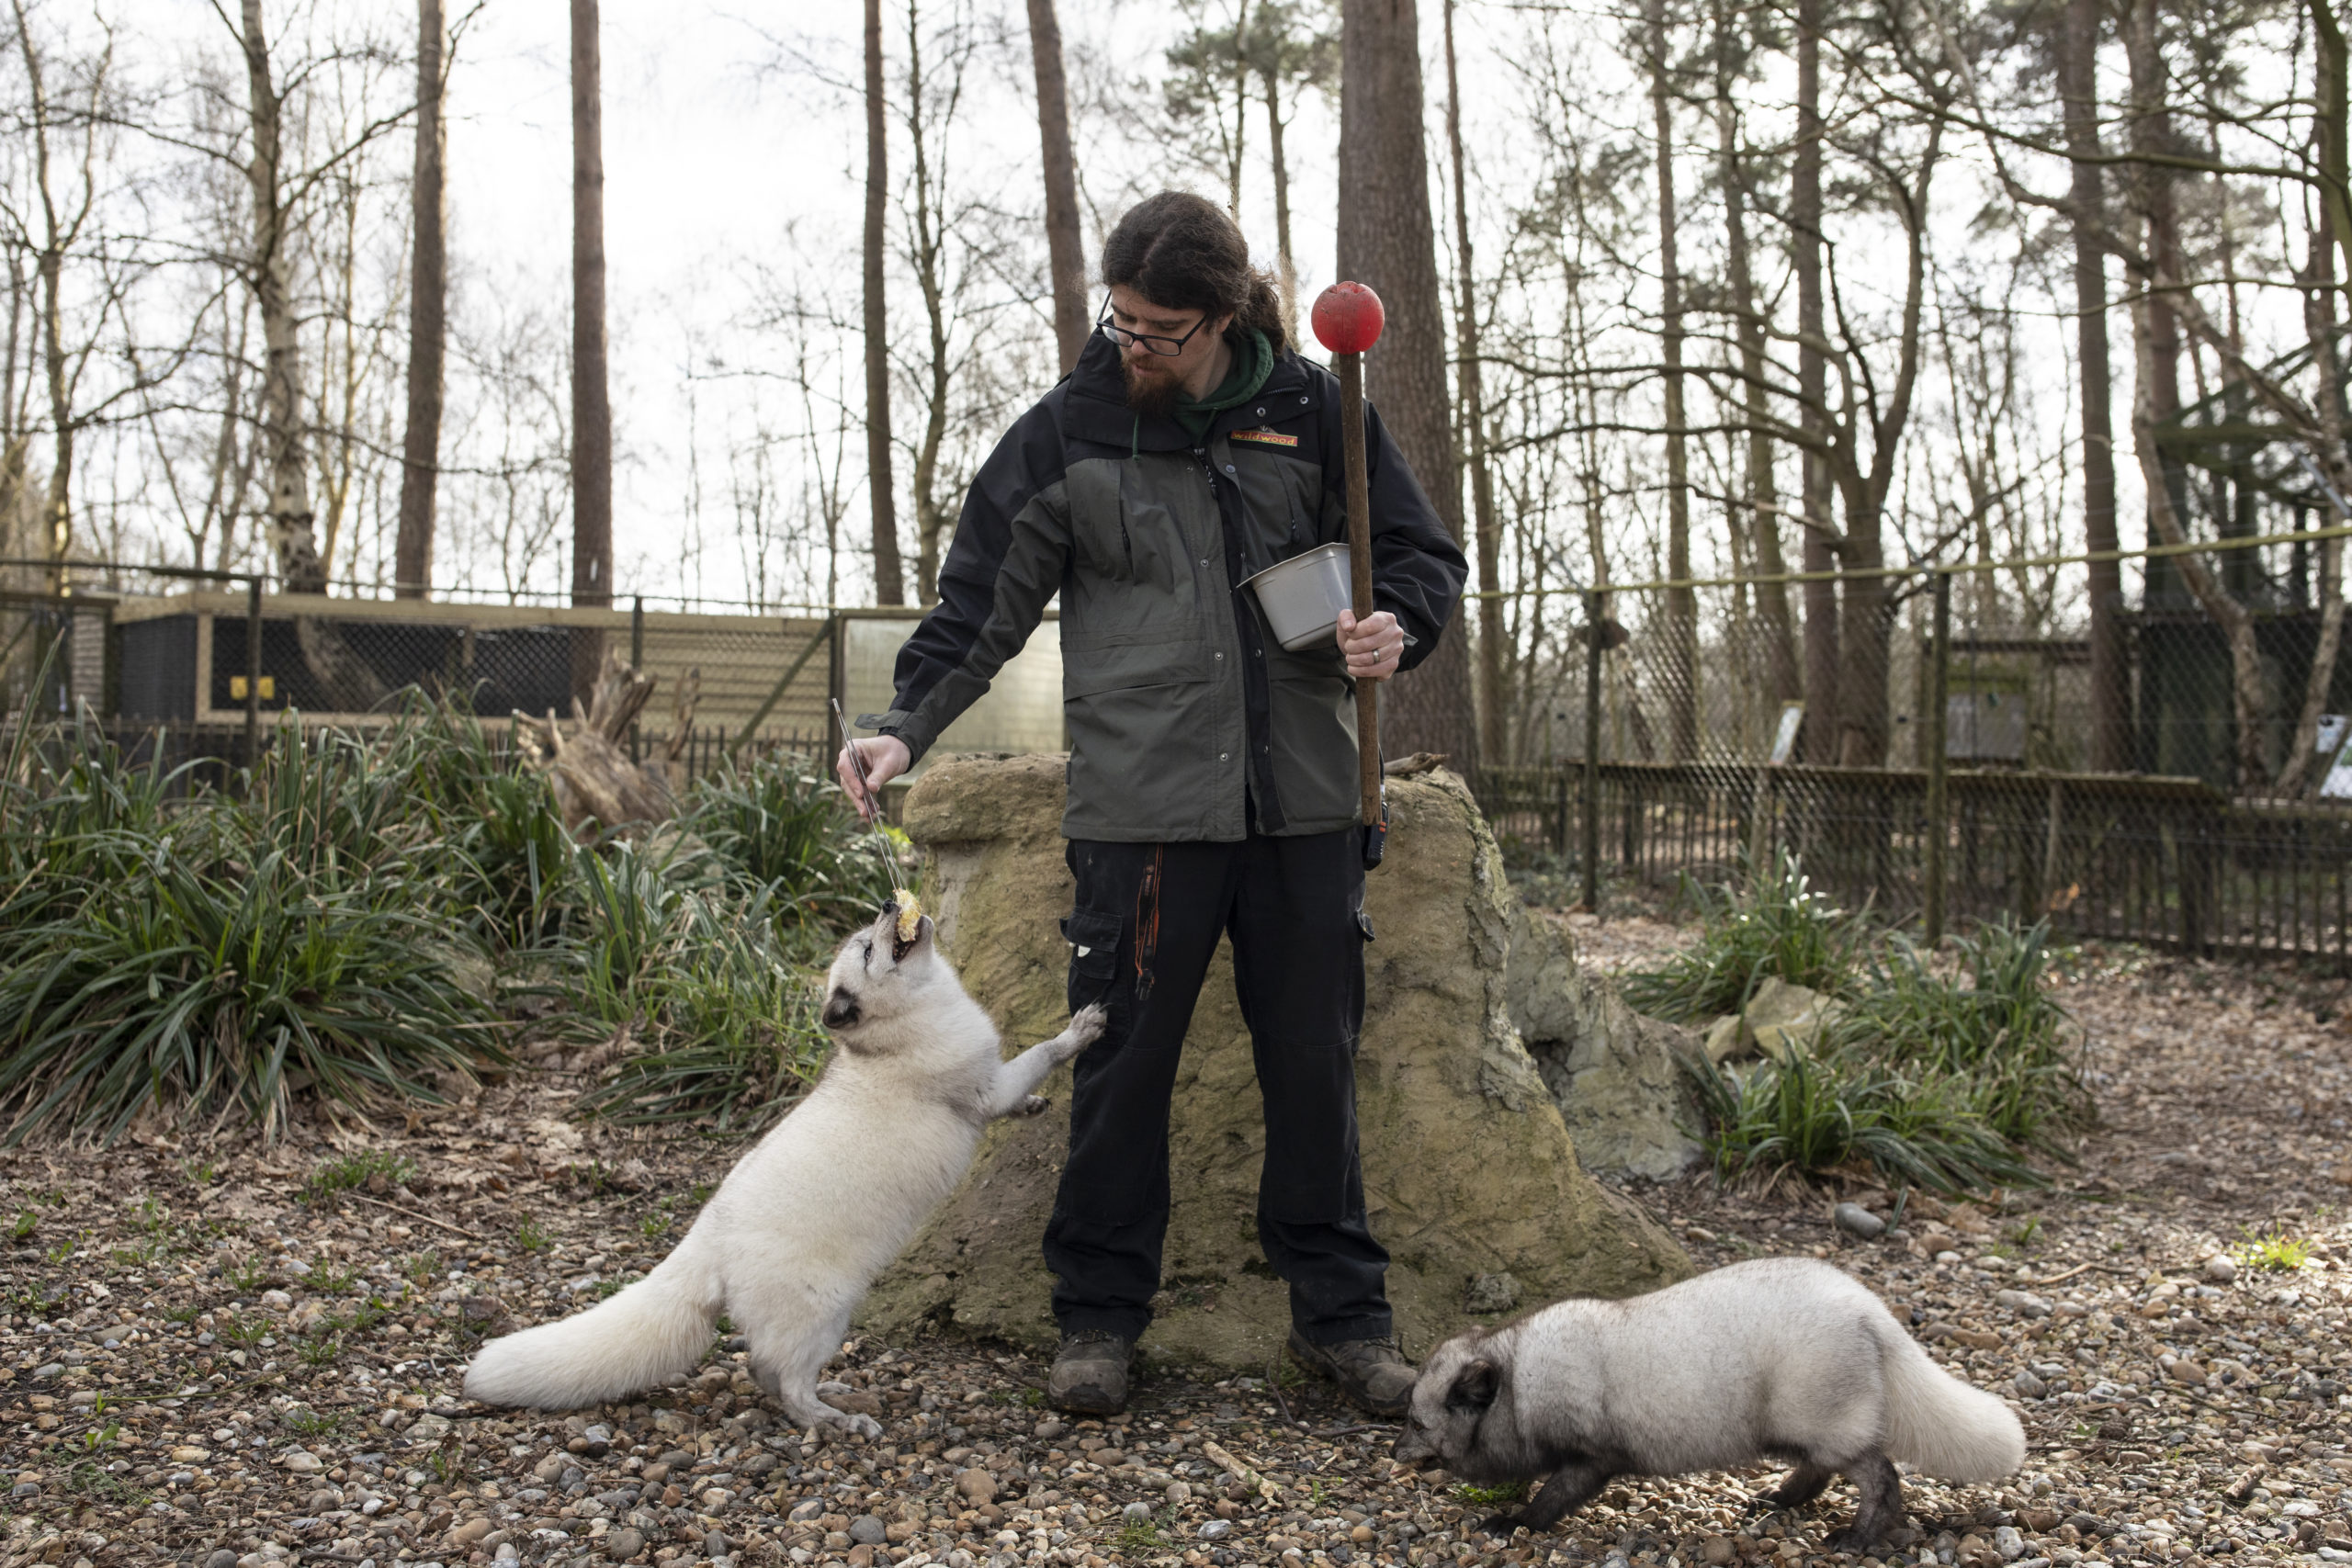 Arctic Foxes are hand fed in their enclosure. (Photo: Dan Kitwood, Getty Images)